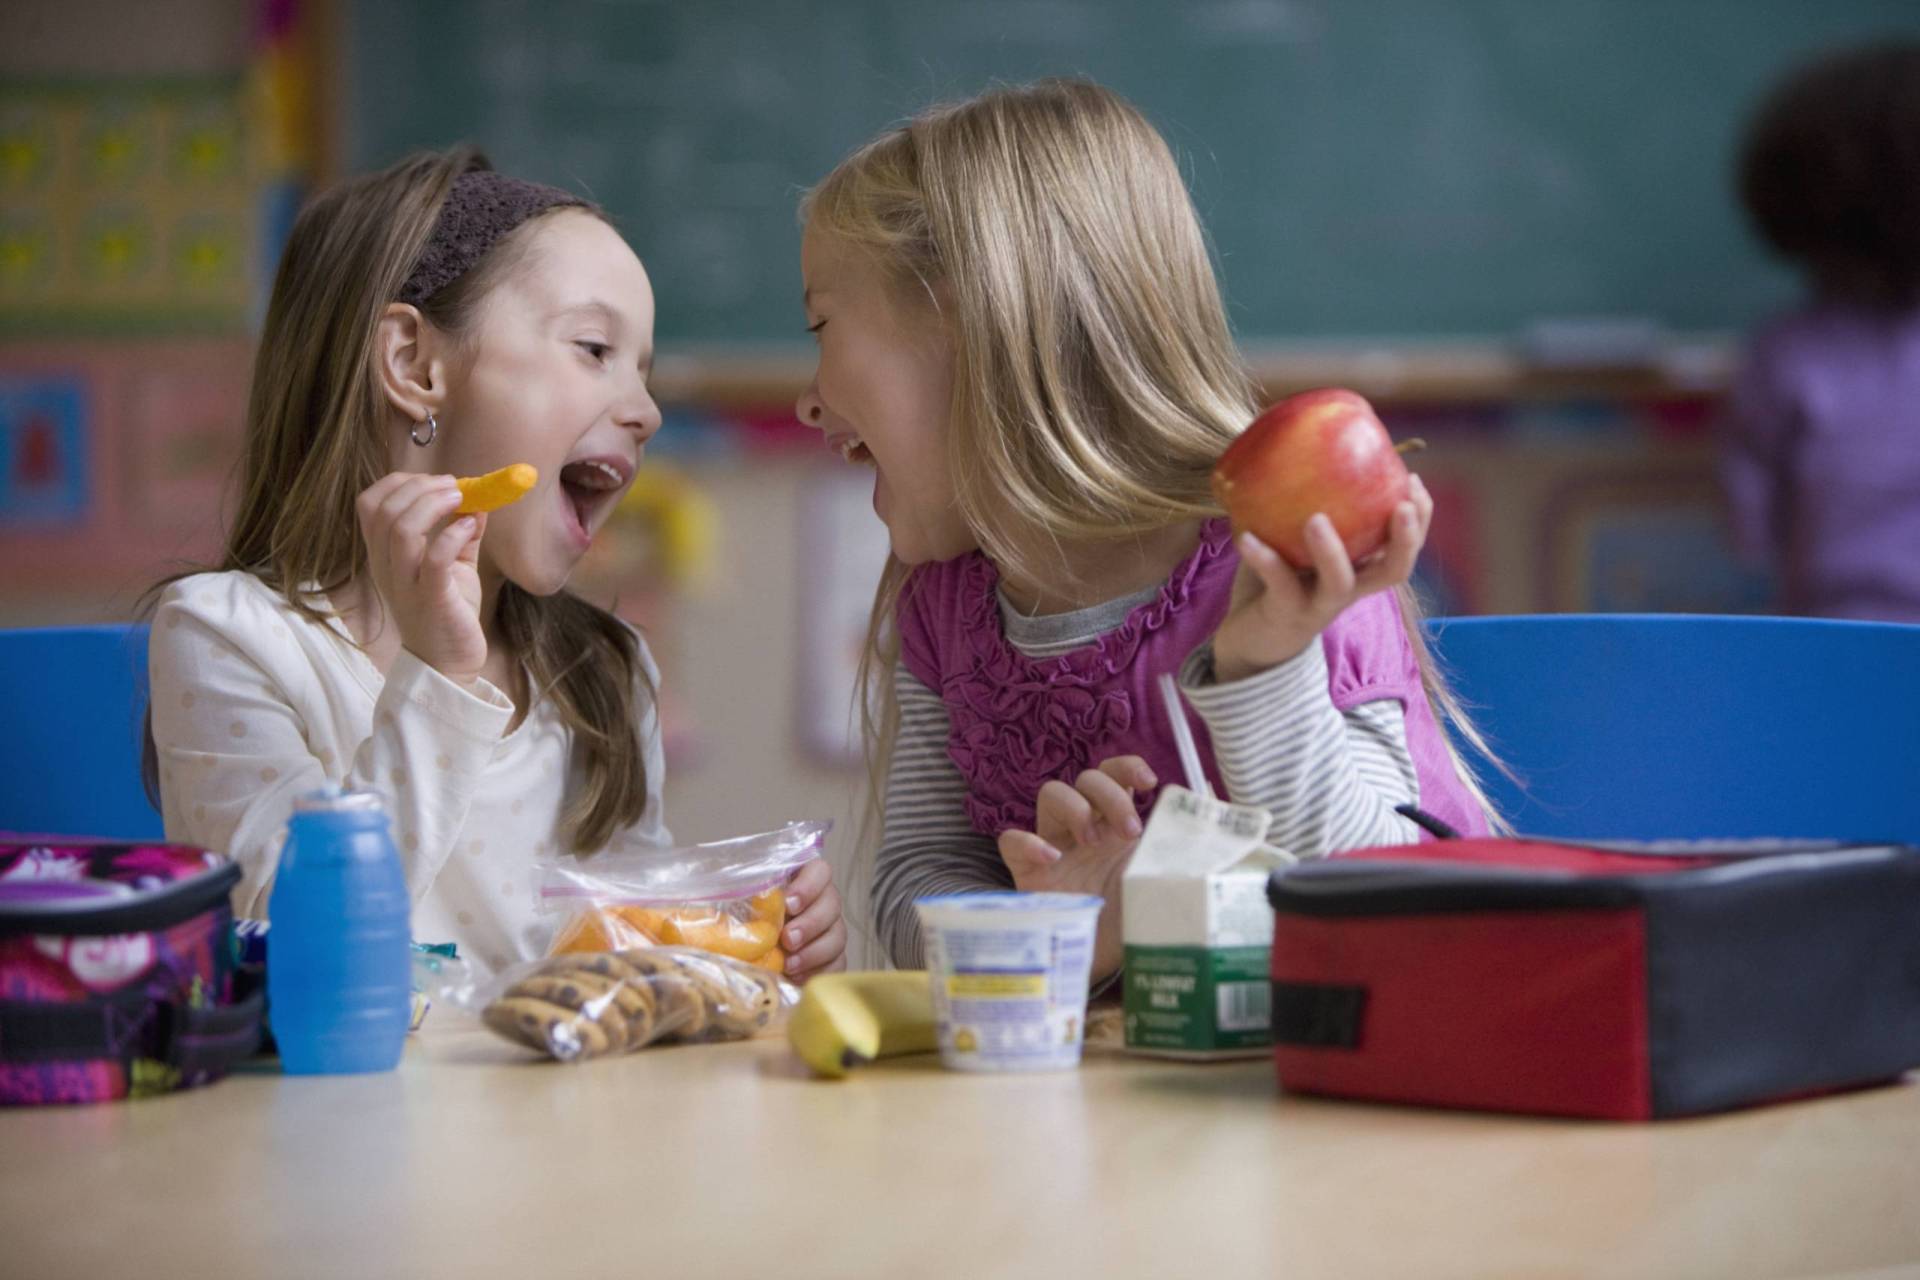 Two elementary school girls sit with lunch boxes in a classroom, pulling happy faces at one another.